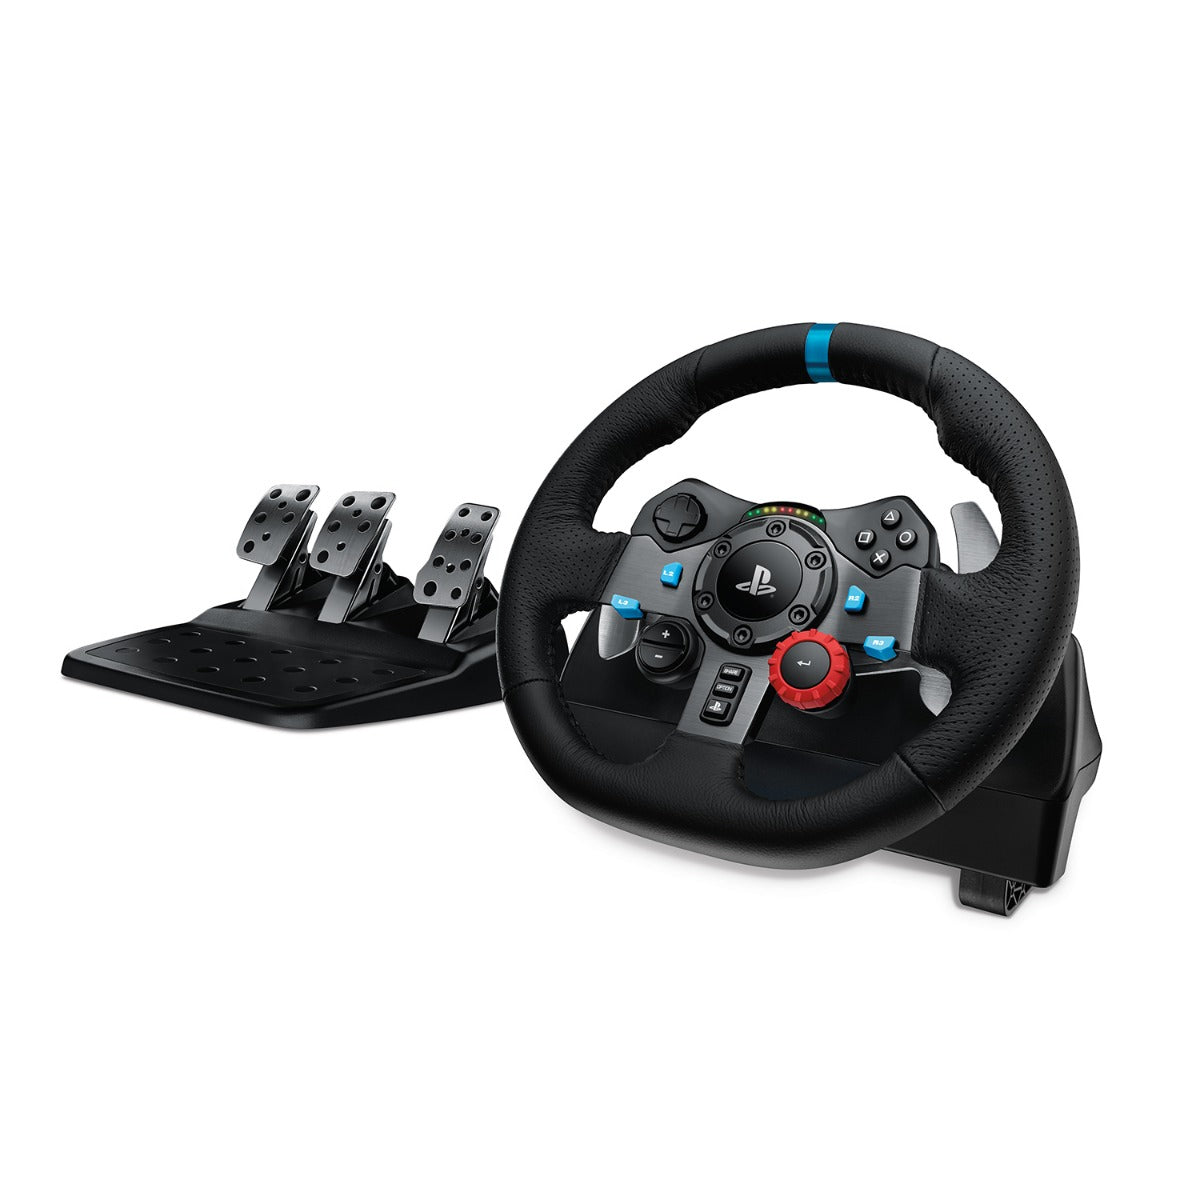 Logitech G29 Driving Force - Steering wheel and pedals set - with cable - for Sony PlayStation 3, Sony PlayStation 4